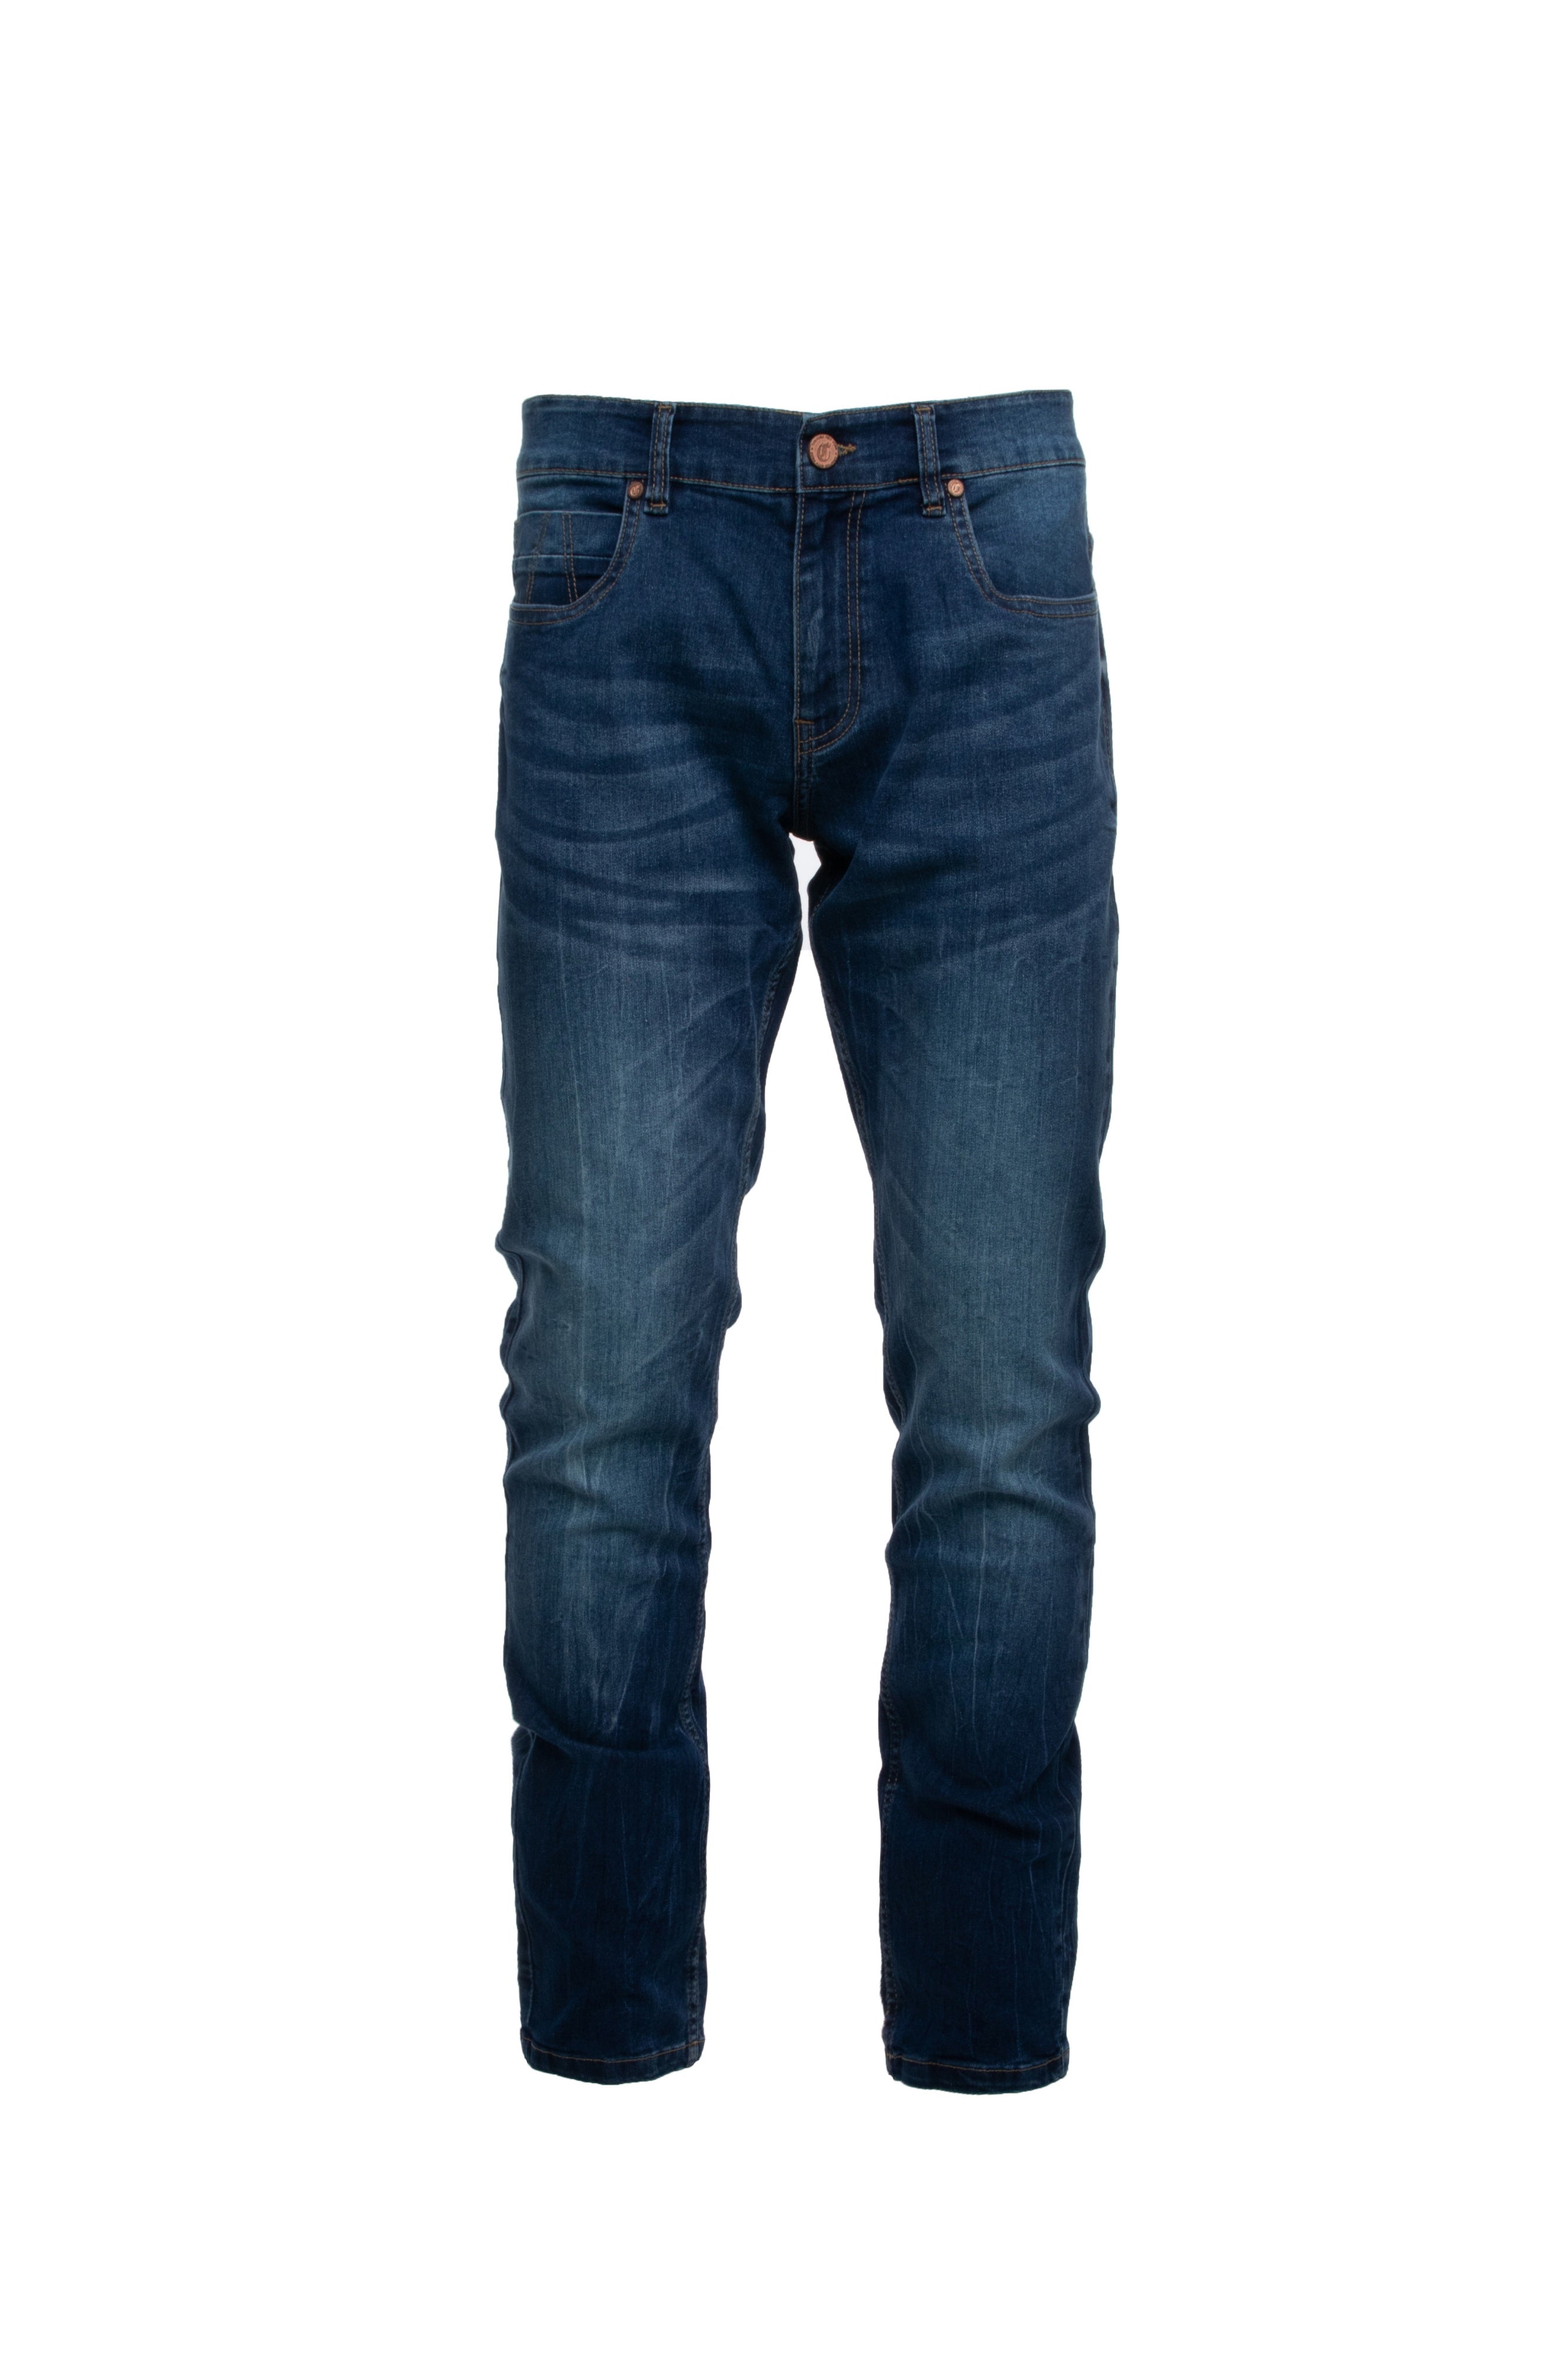 CULTURA AZURE for JEANS Slim X-RAY Stretch Fit Jeans Men –